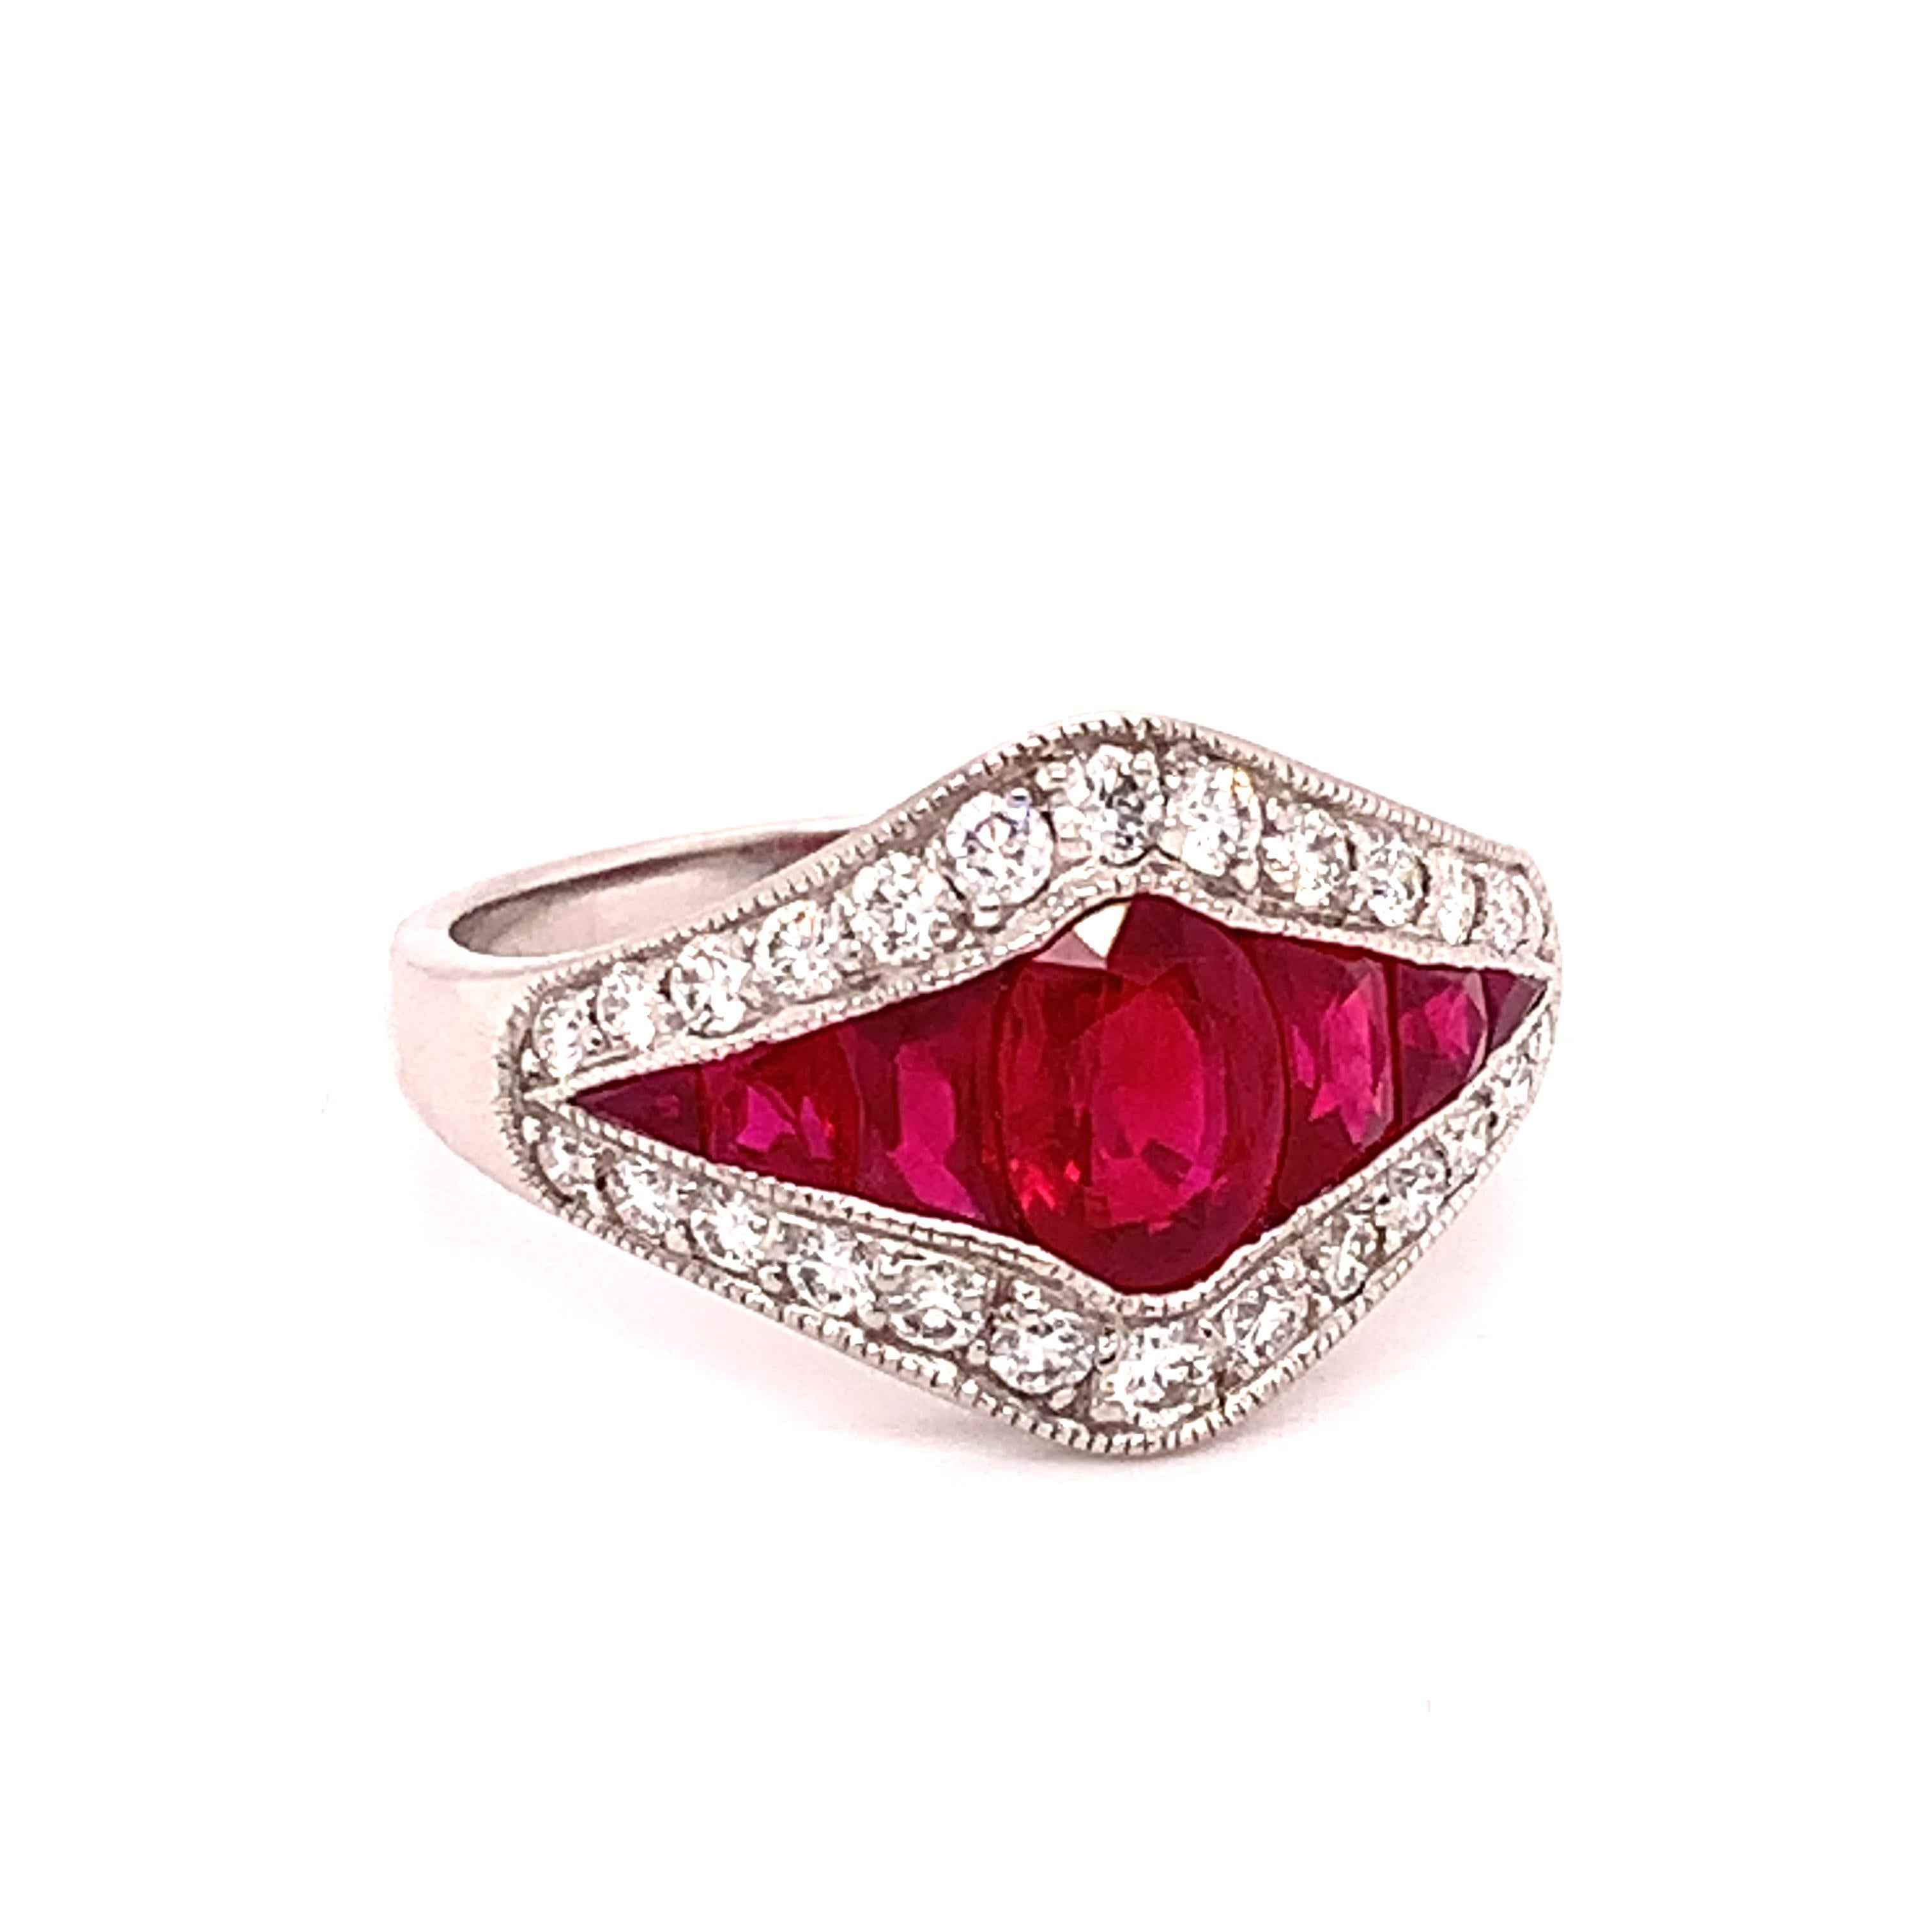 Platinum 2.79 Carat Finest Genuine Natural Ruby Ring (#J4865)

Platinum ruby and diamond ring featuring seven earth mined rubies weighing 2.79 carats total. The center oval ruby weighs about 1 carat and measures about 6mm x 4mm. The six side